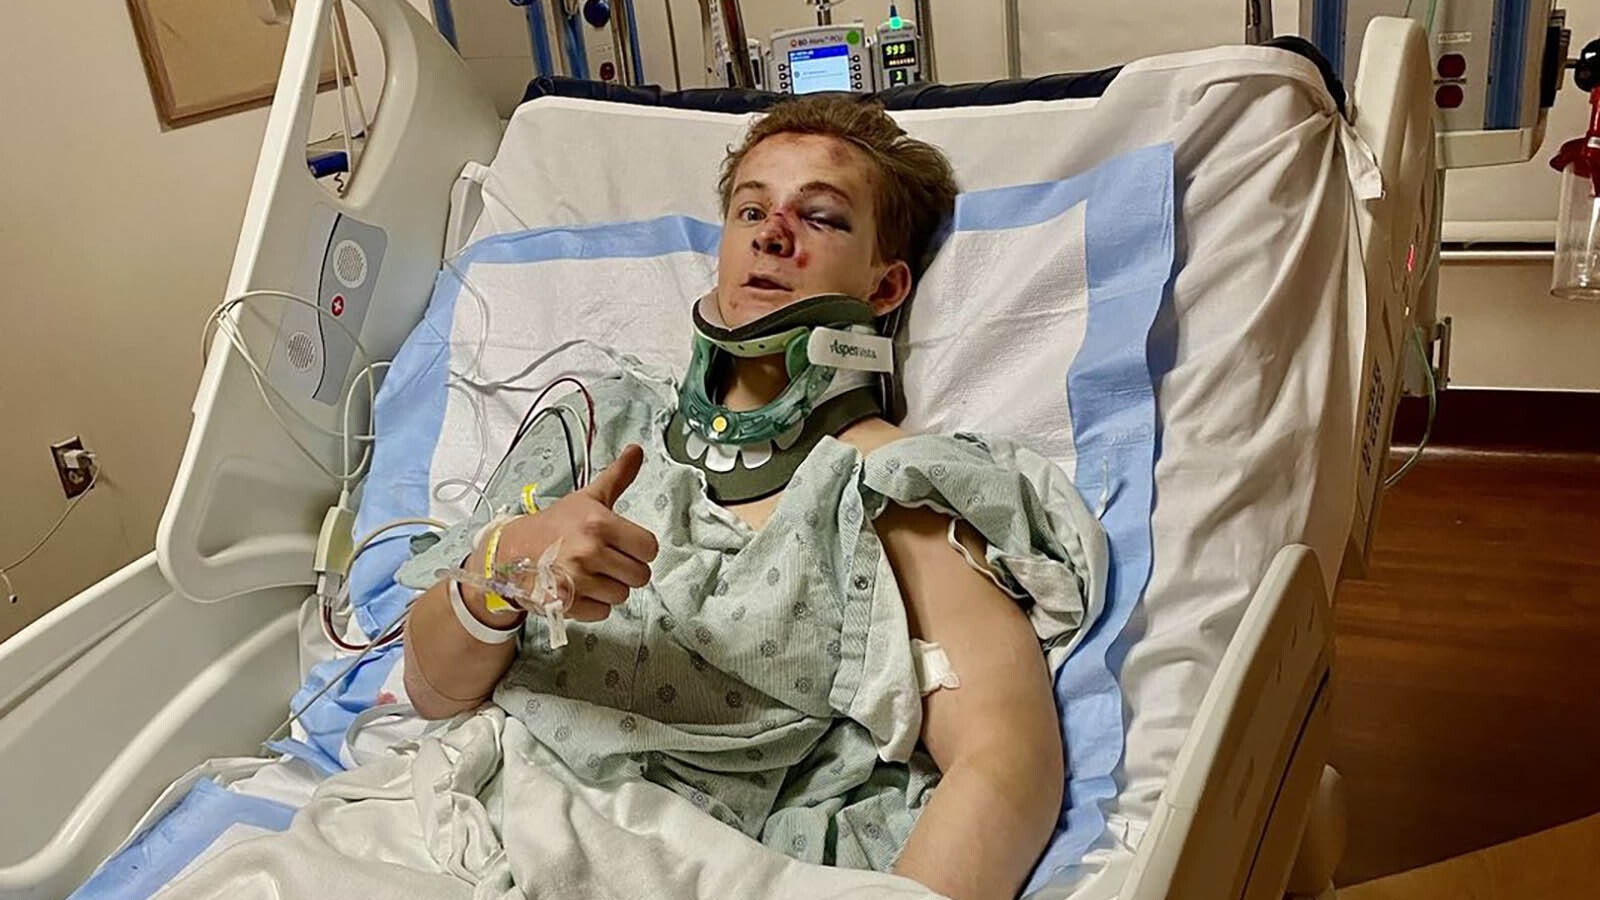 Casper College bareback rider Austin Broderson gives a thumbs up from a hospital bed in Denver after suffering a horrific crash riding in the National Western Stock Show Rodeo on Jan. 15, 2023.